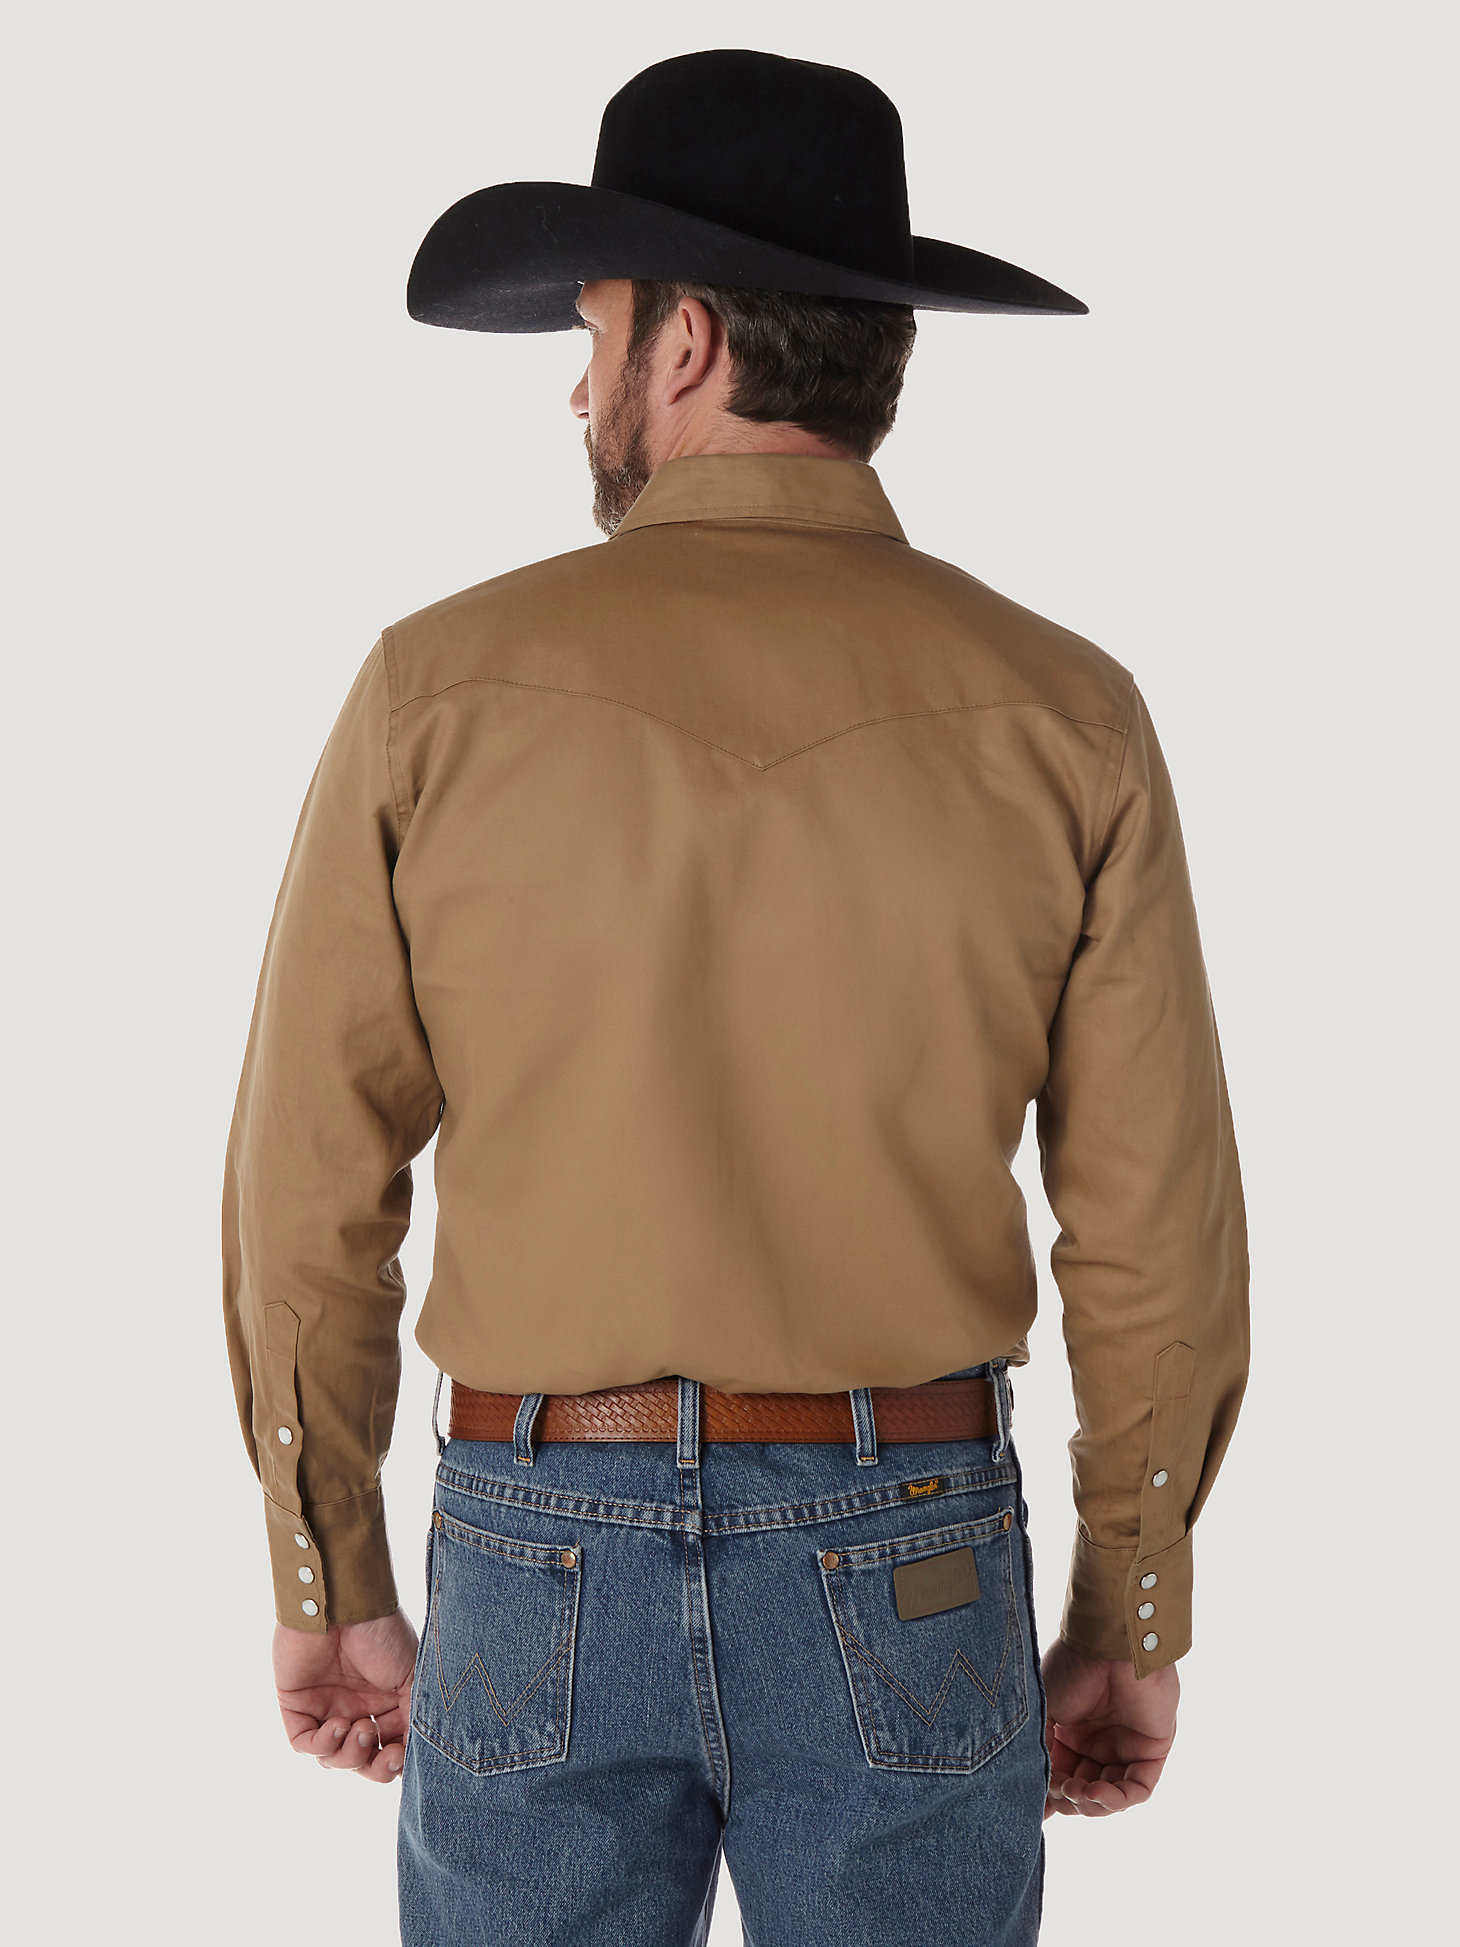 Cowboy Cut® Firm Finish Long Sleeve Western Snap Solid Work Shirt in Rawhide alternative view 1